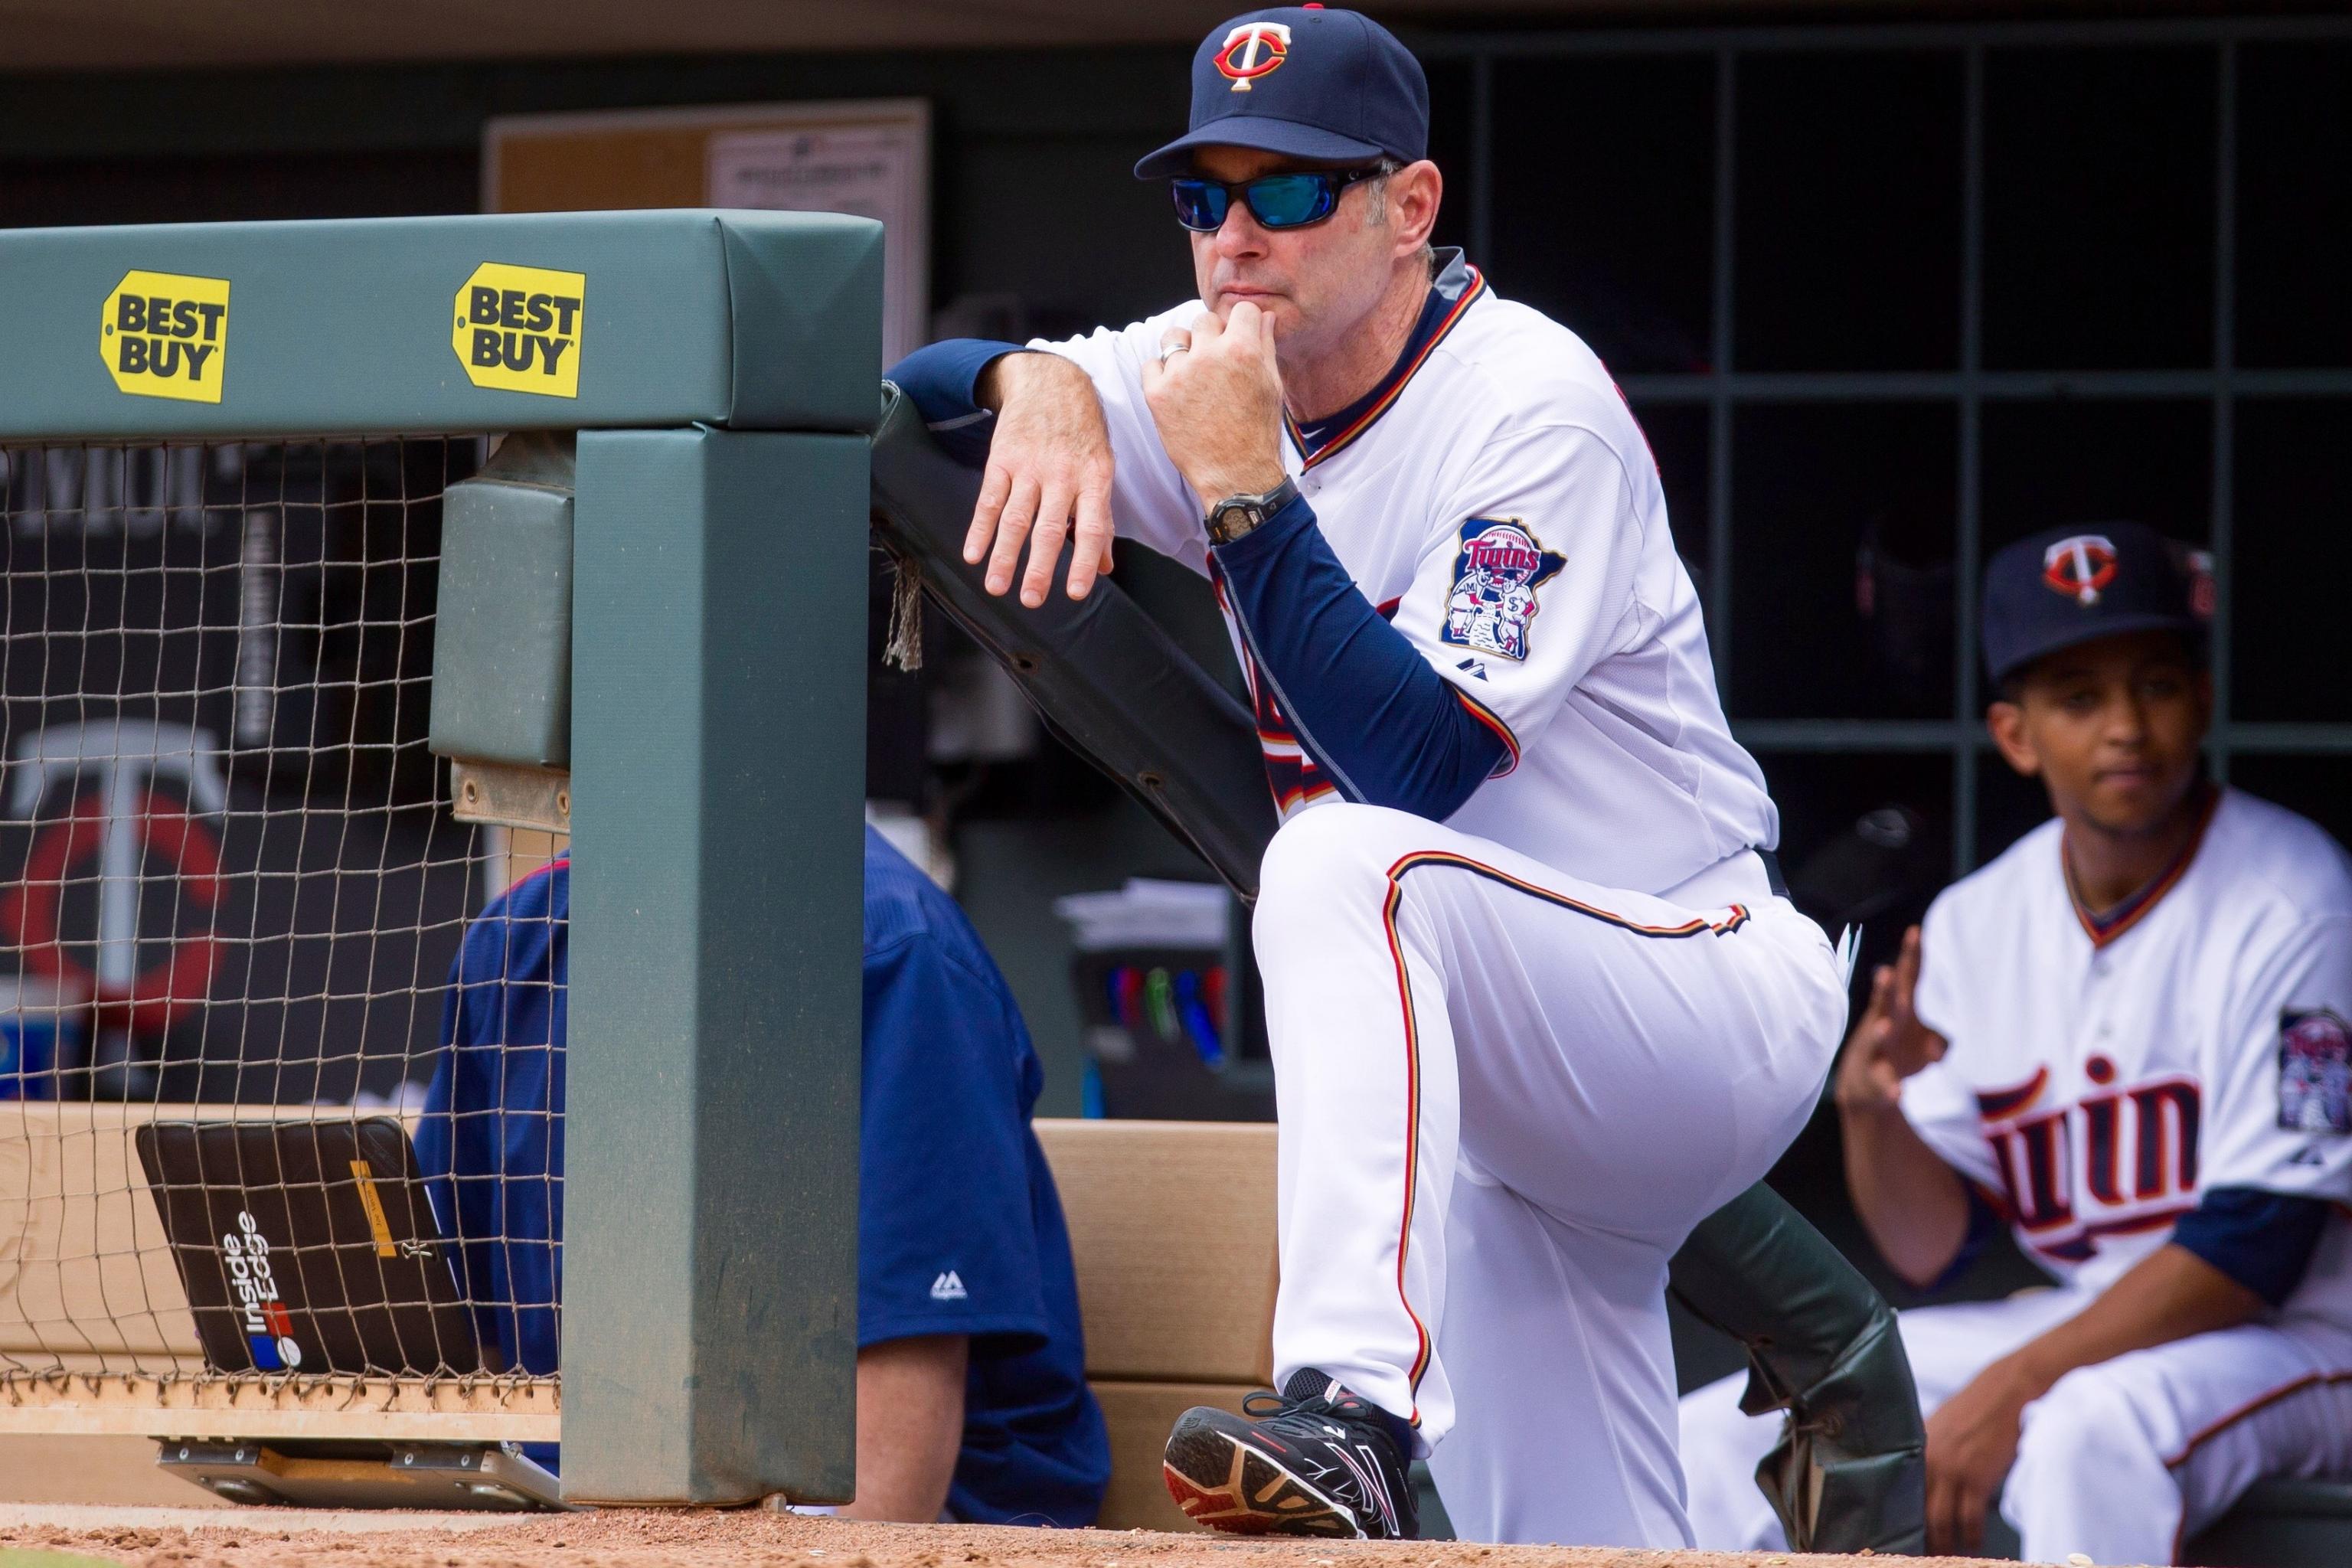 Paul Molitor's Managerial Career Beginning as Brightly as Playing